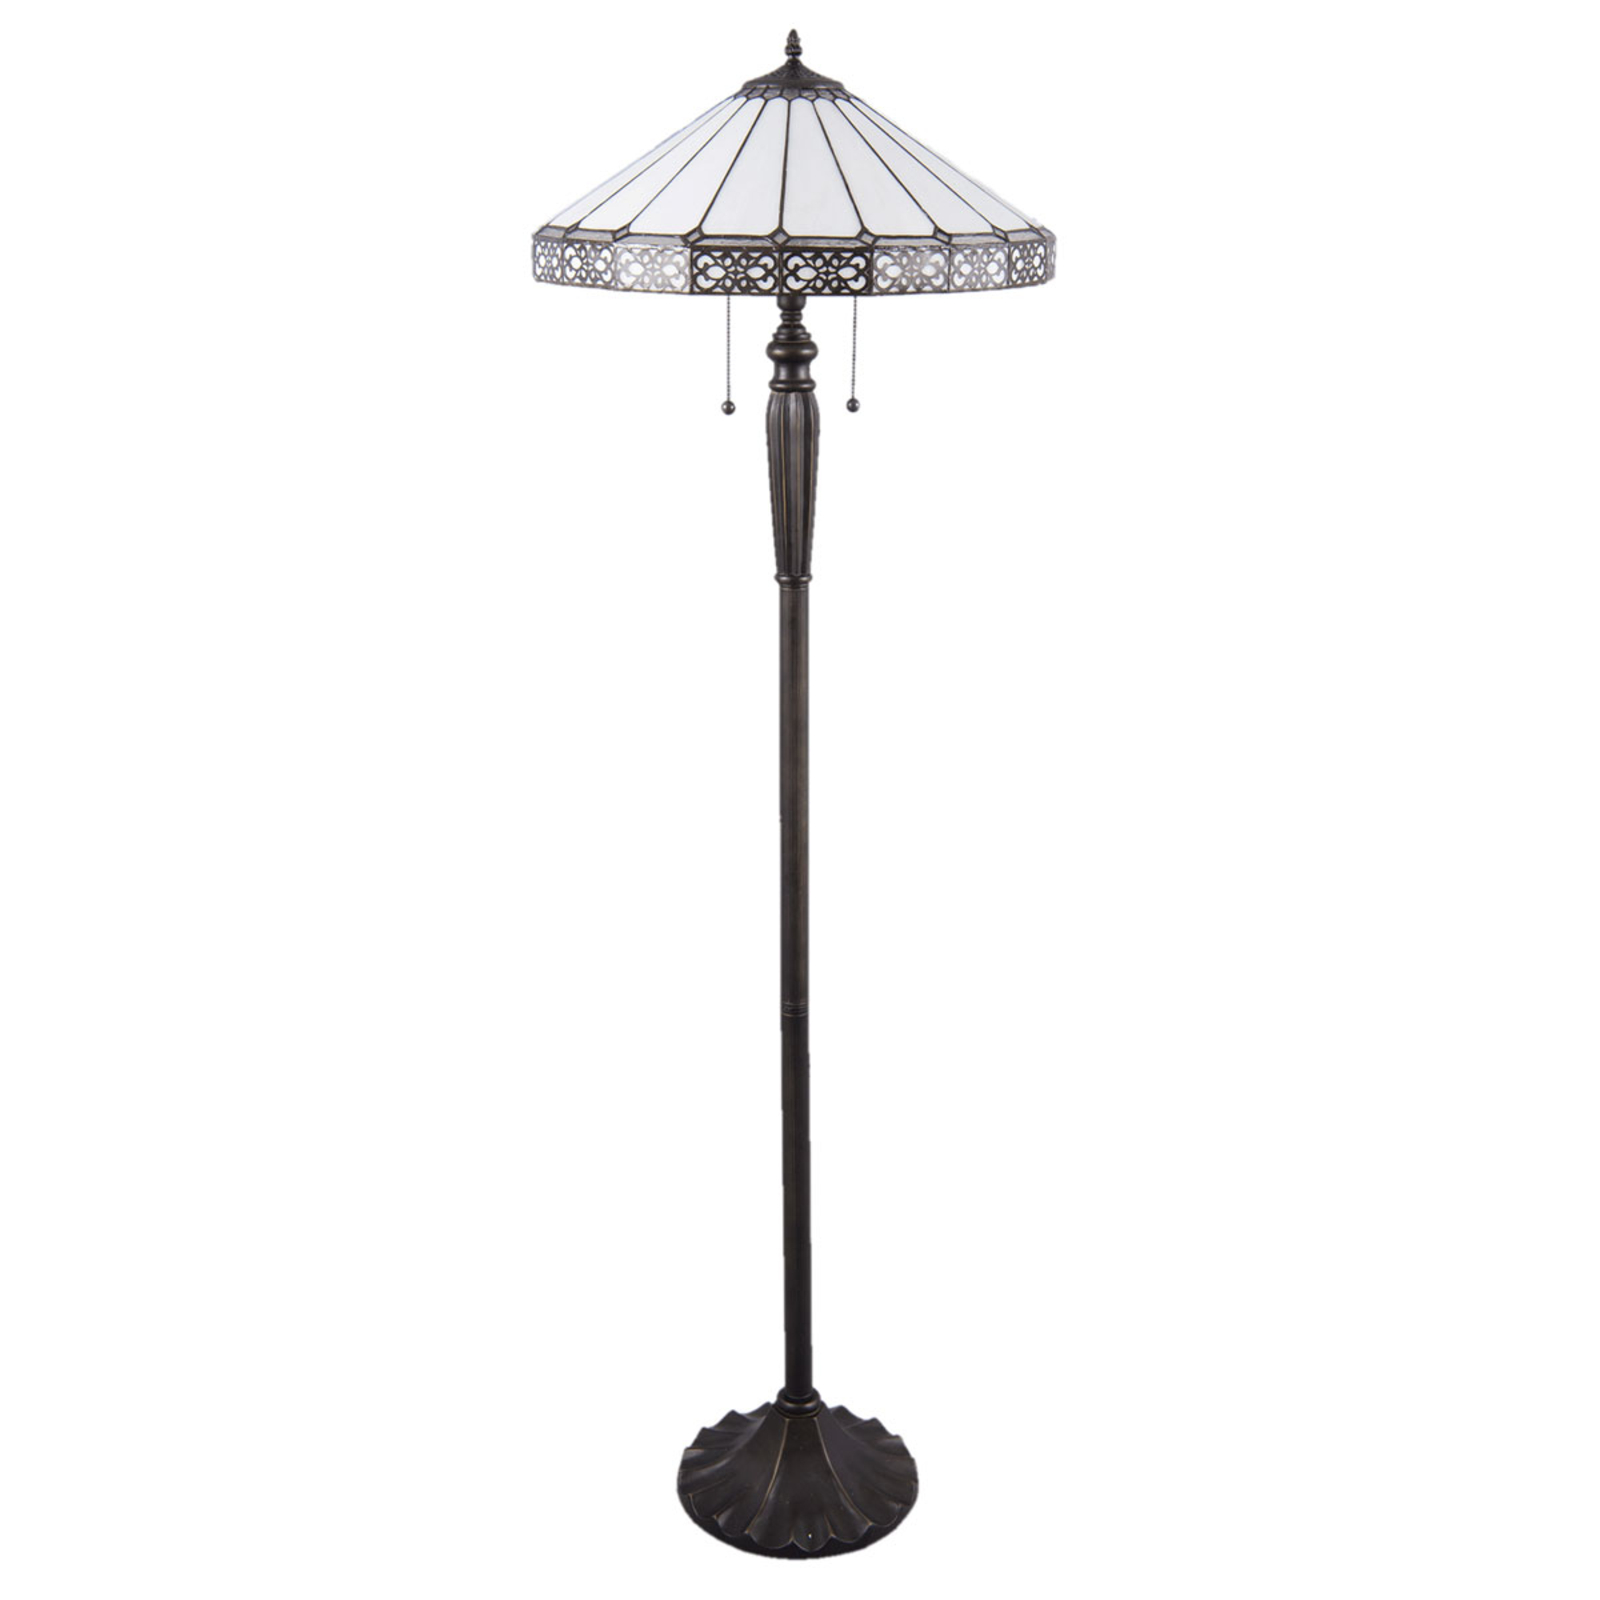 5210 floor lamp, black and white glass lampshade